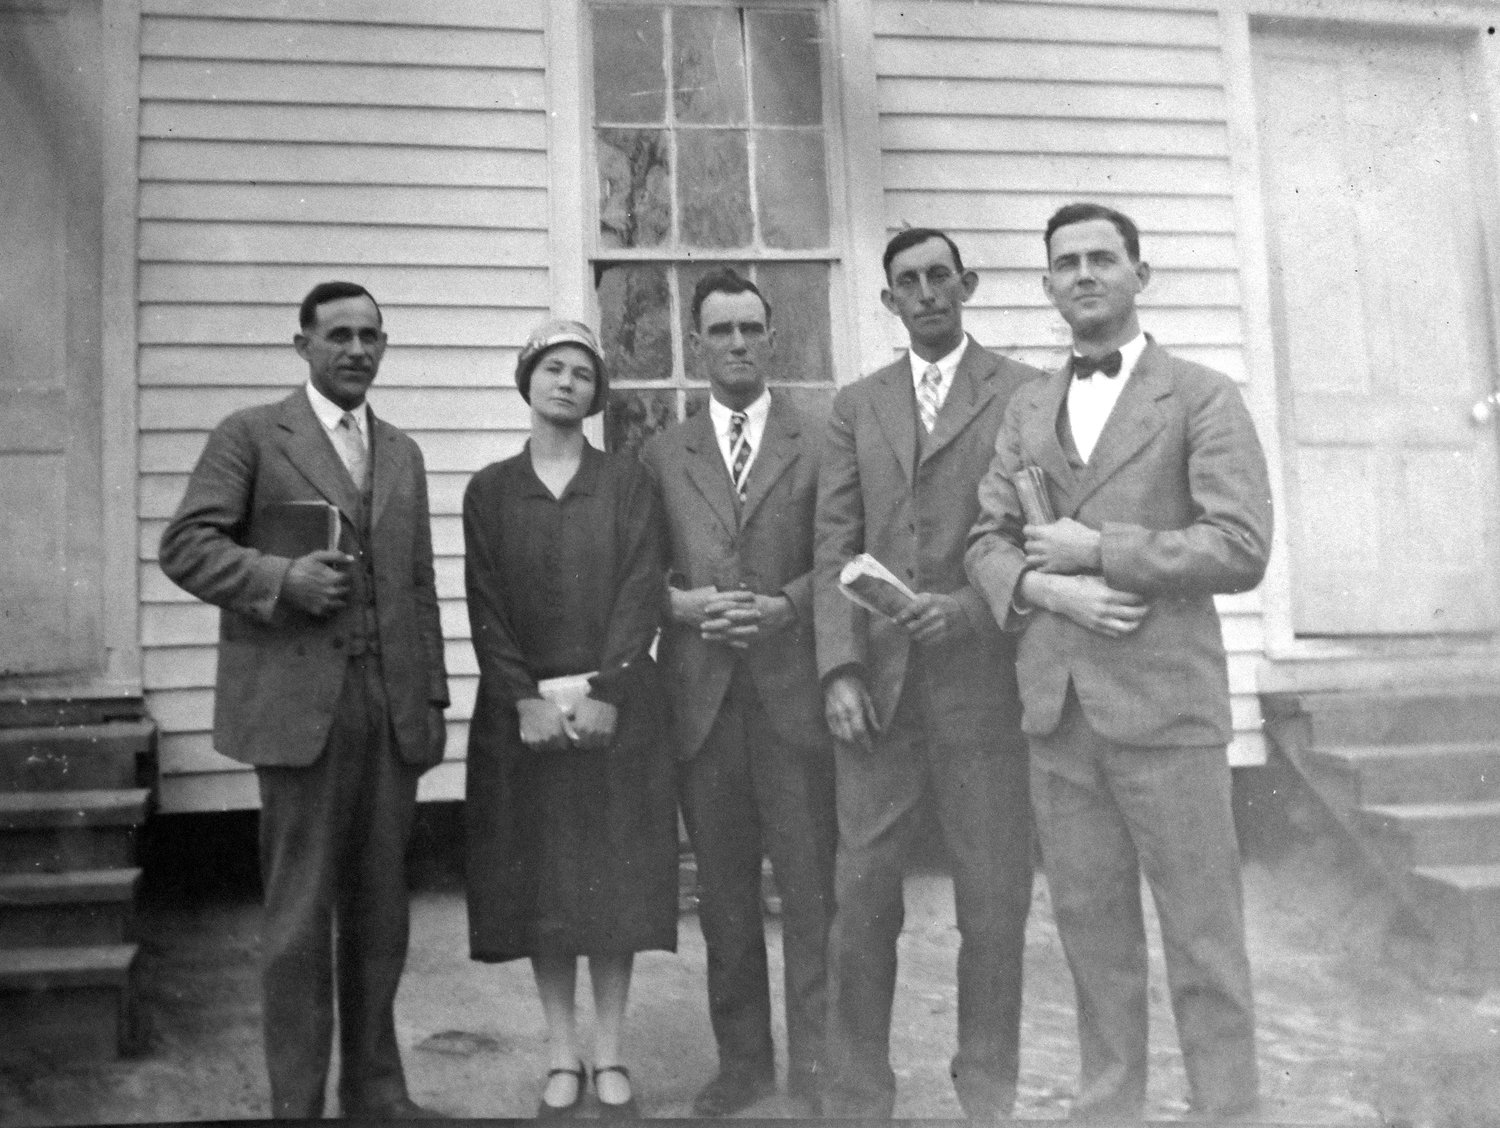 The Flat Creek Sacred Singers and their pastor A. H. Holland on left (ca.1928).